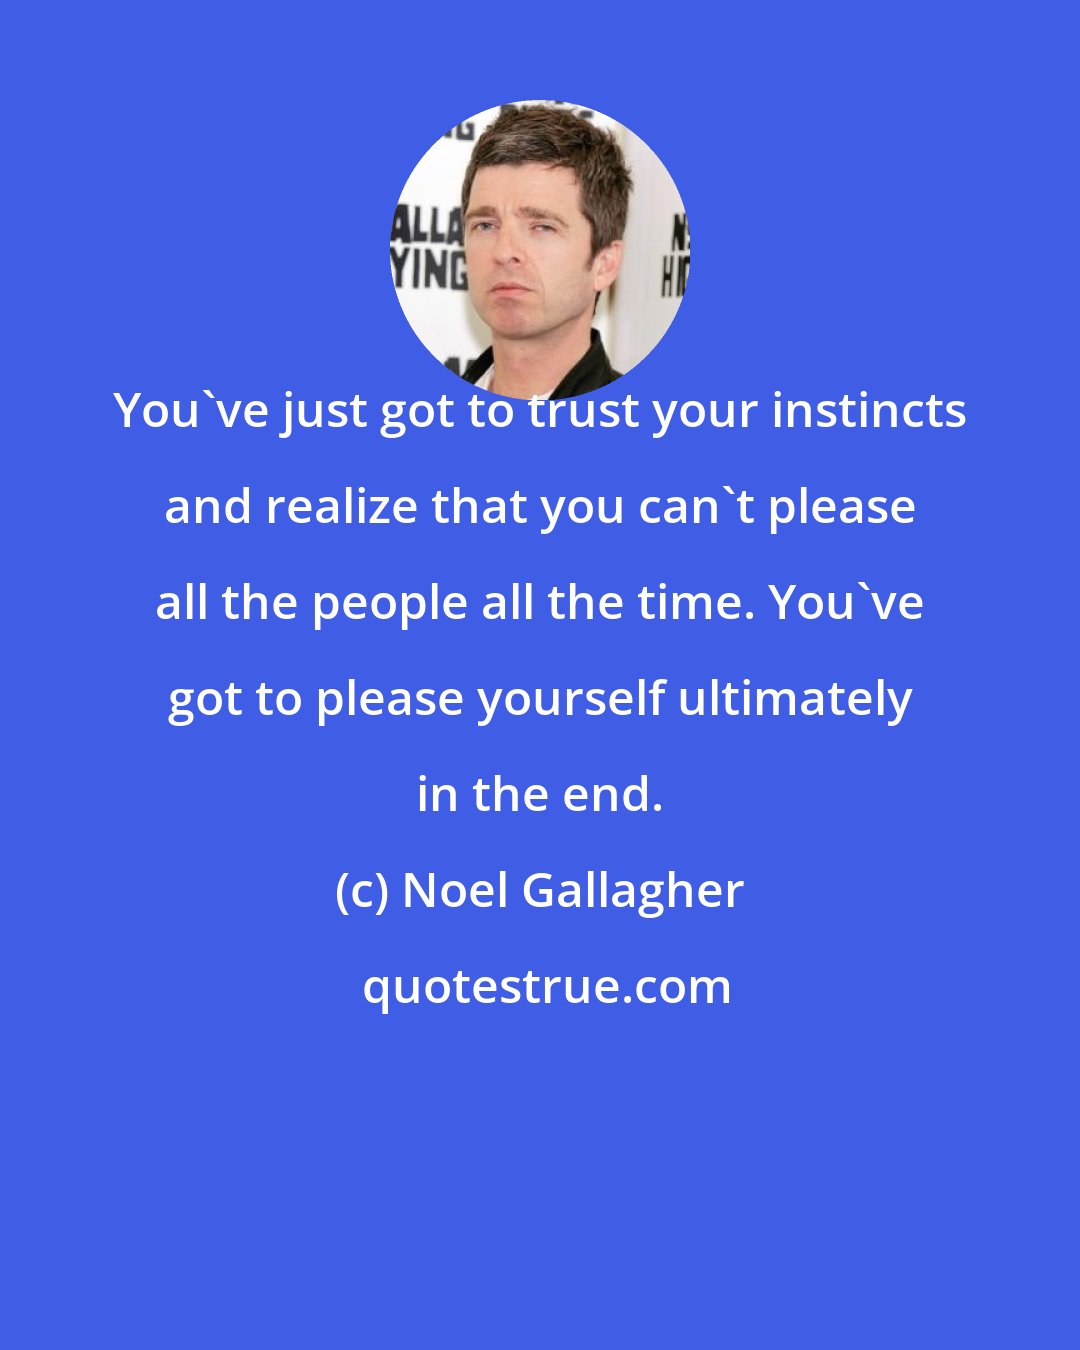 Noel Gallagher: You've just got to trust your instincts and realize that you can't please all the people all the time. You've got to please yourself ultimately in the end.